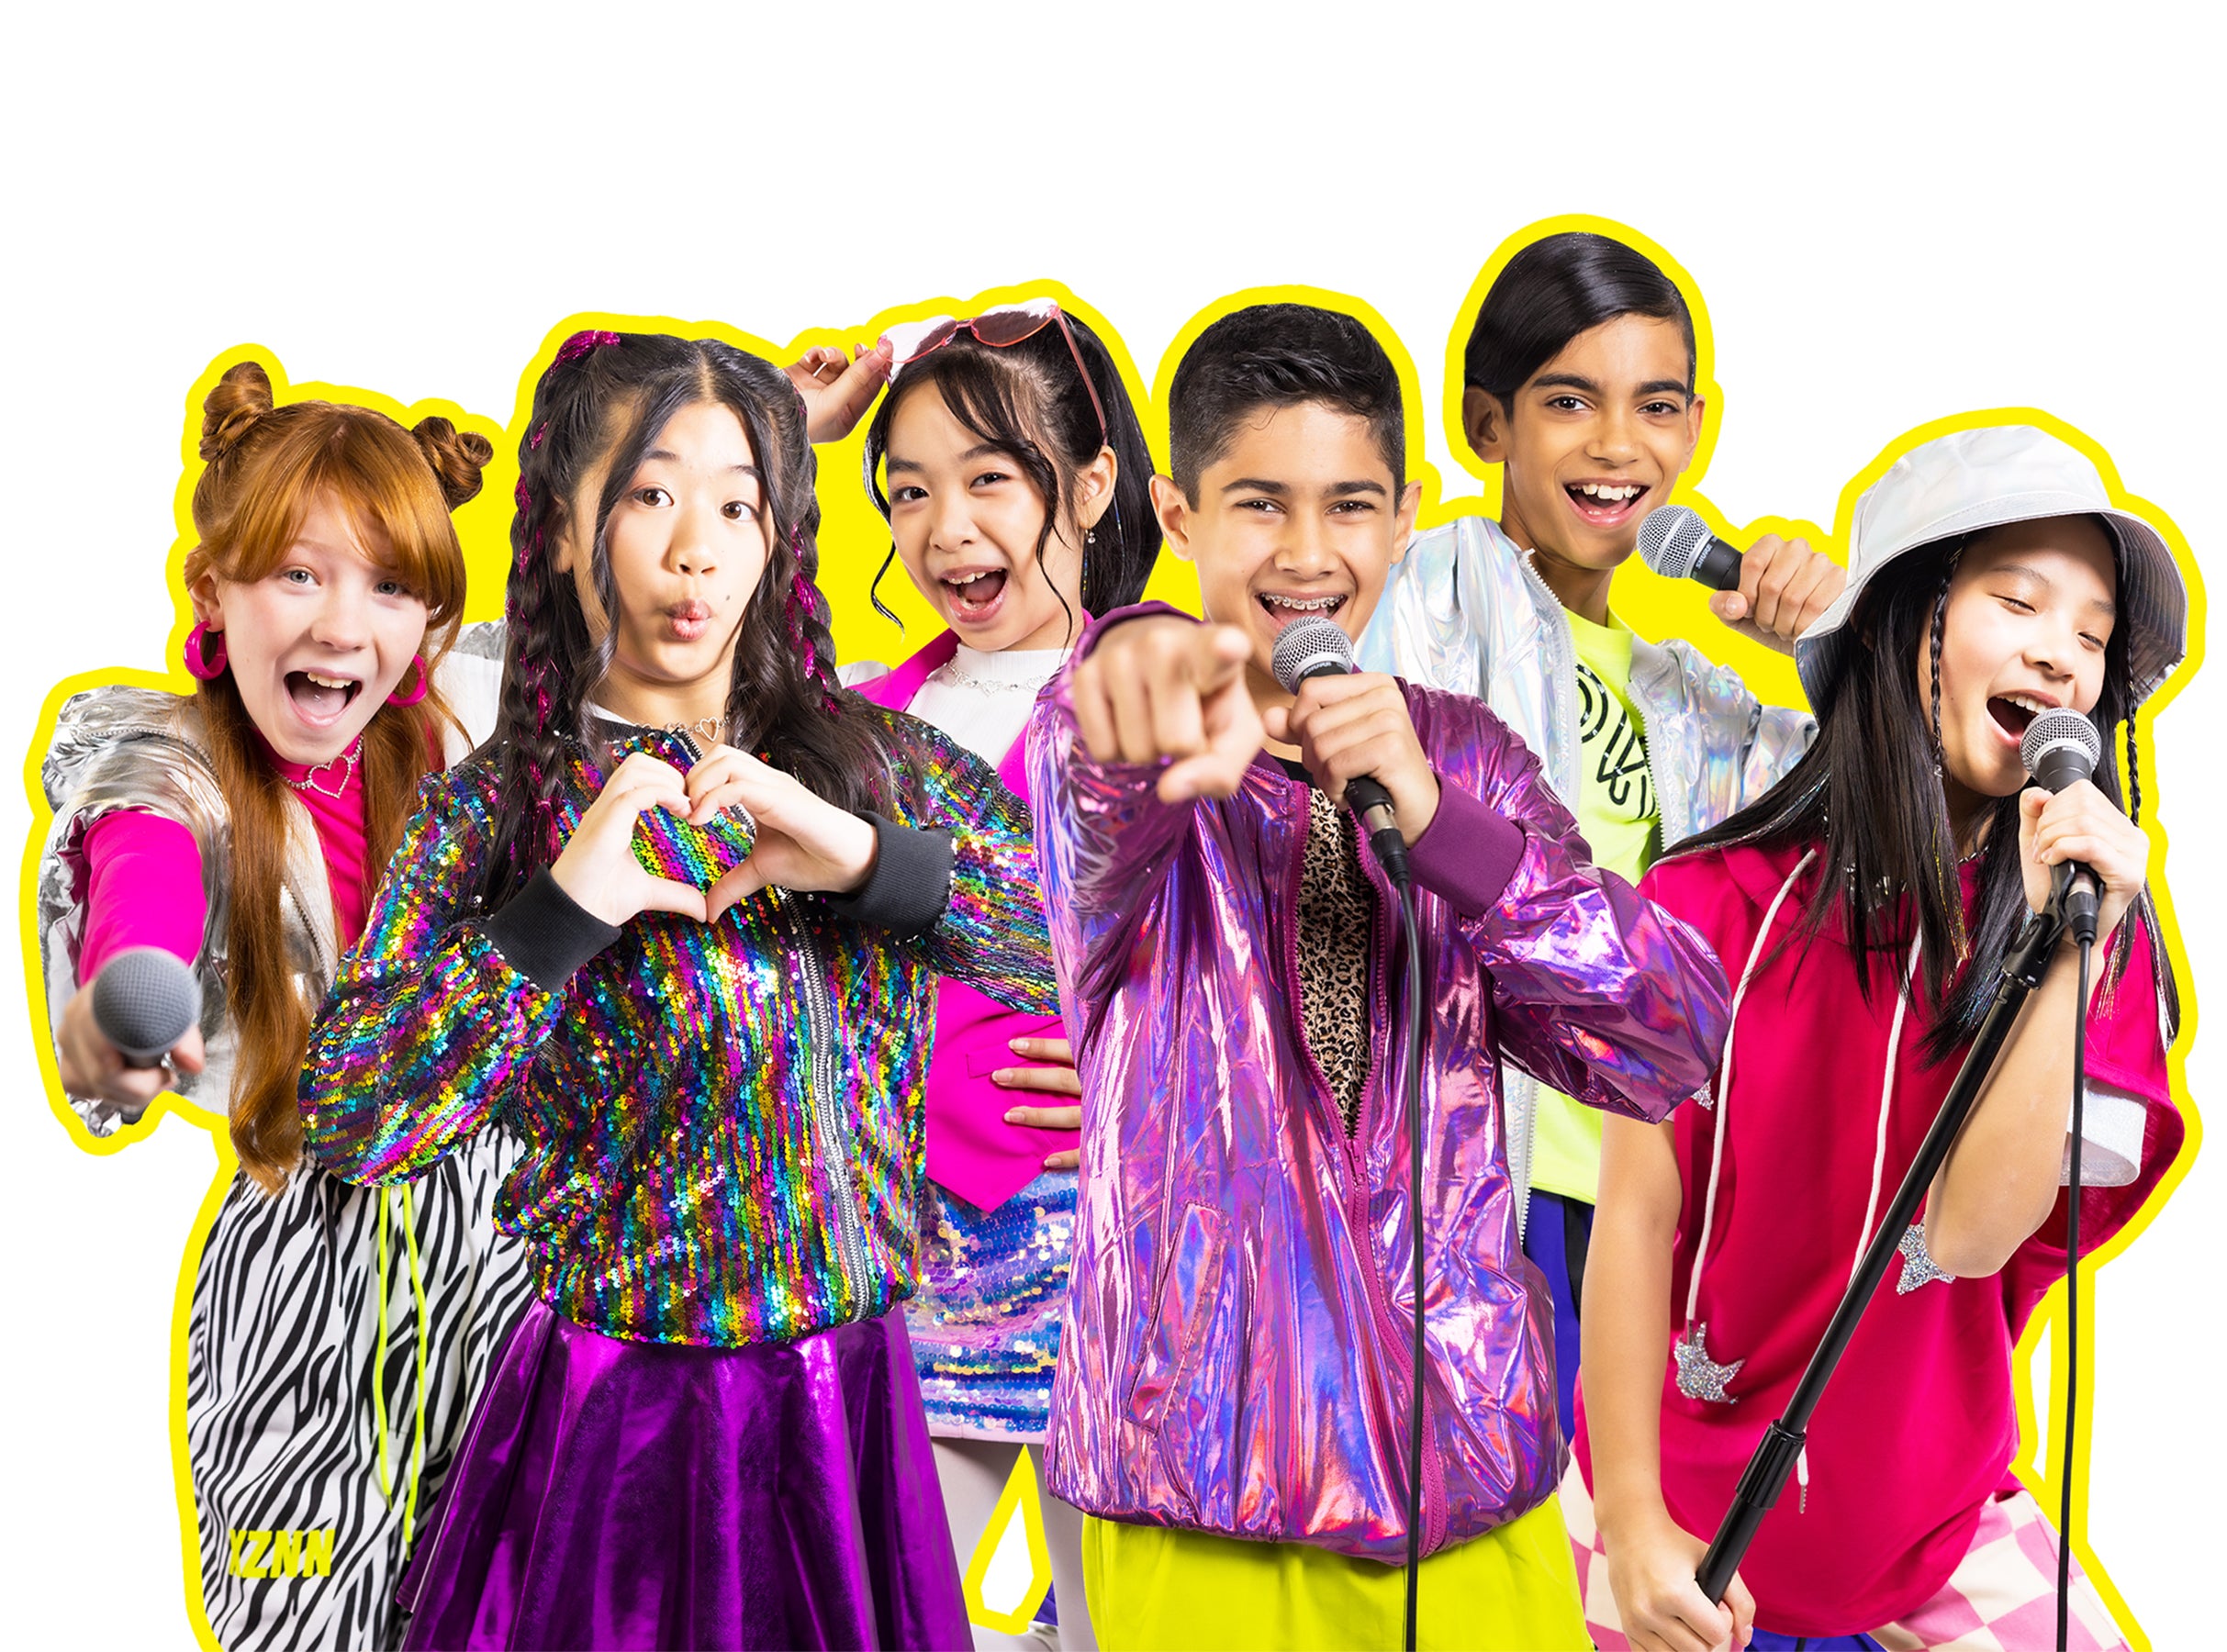 Mini Pop Kids Live - The Good Vibes Tour in Toronto promo photo for Ticket Deals  presale offer code